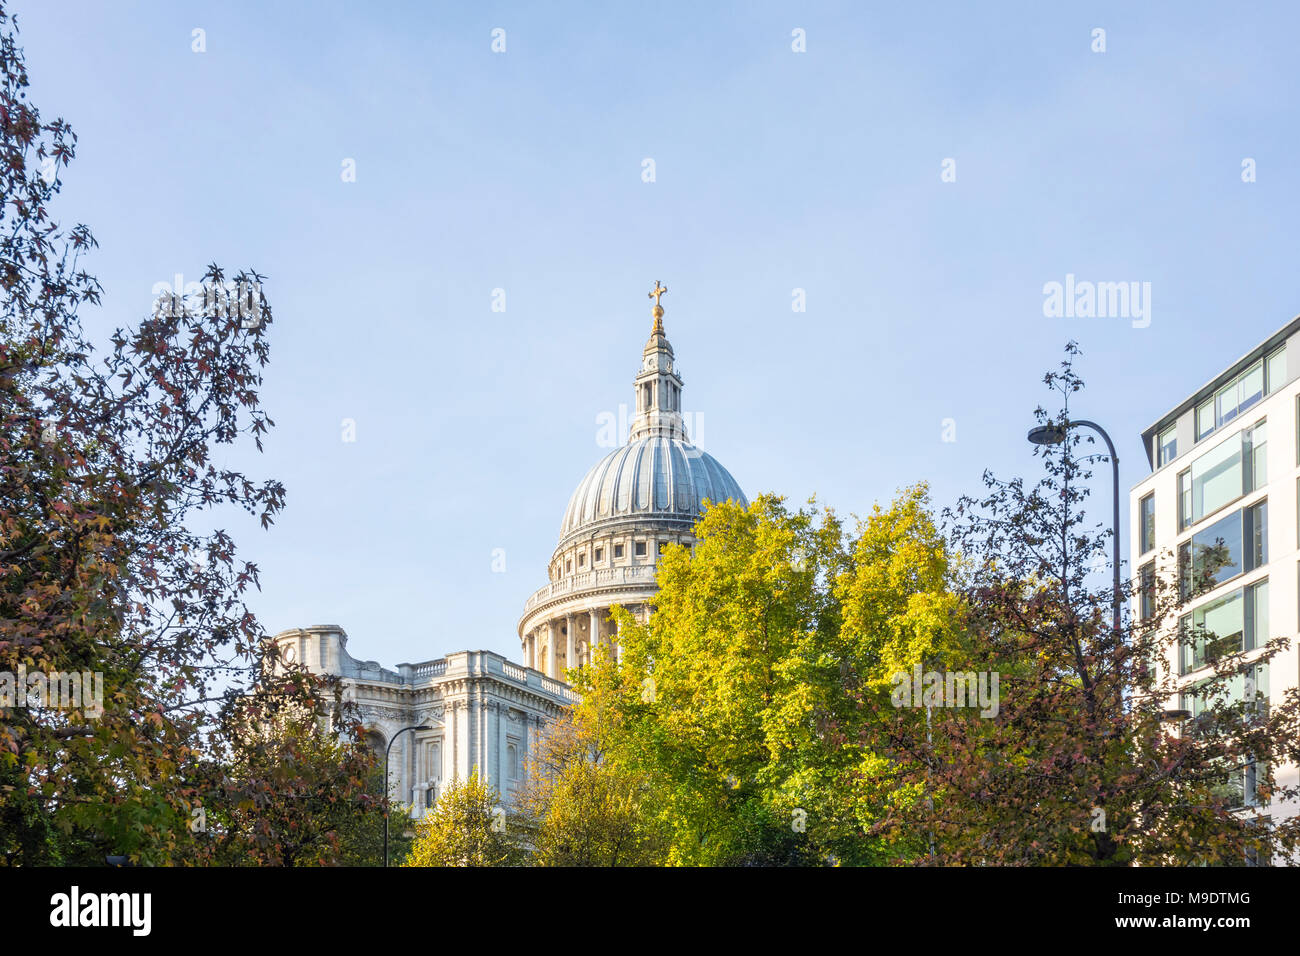 St Paul's Cathedral dome viewed behind trees. City of London, UK Stock Photo